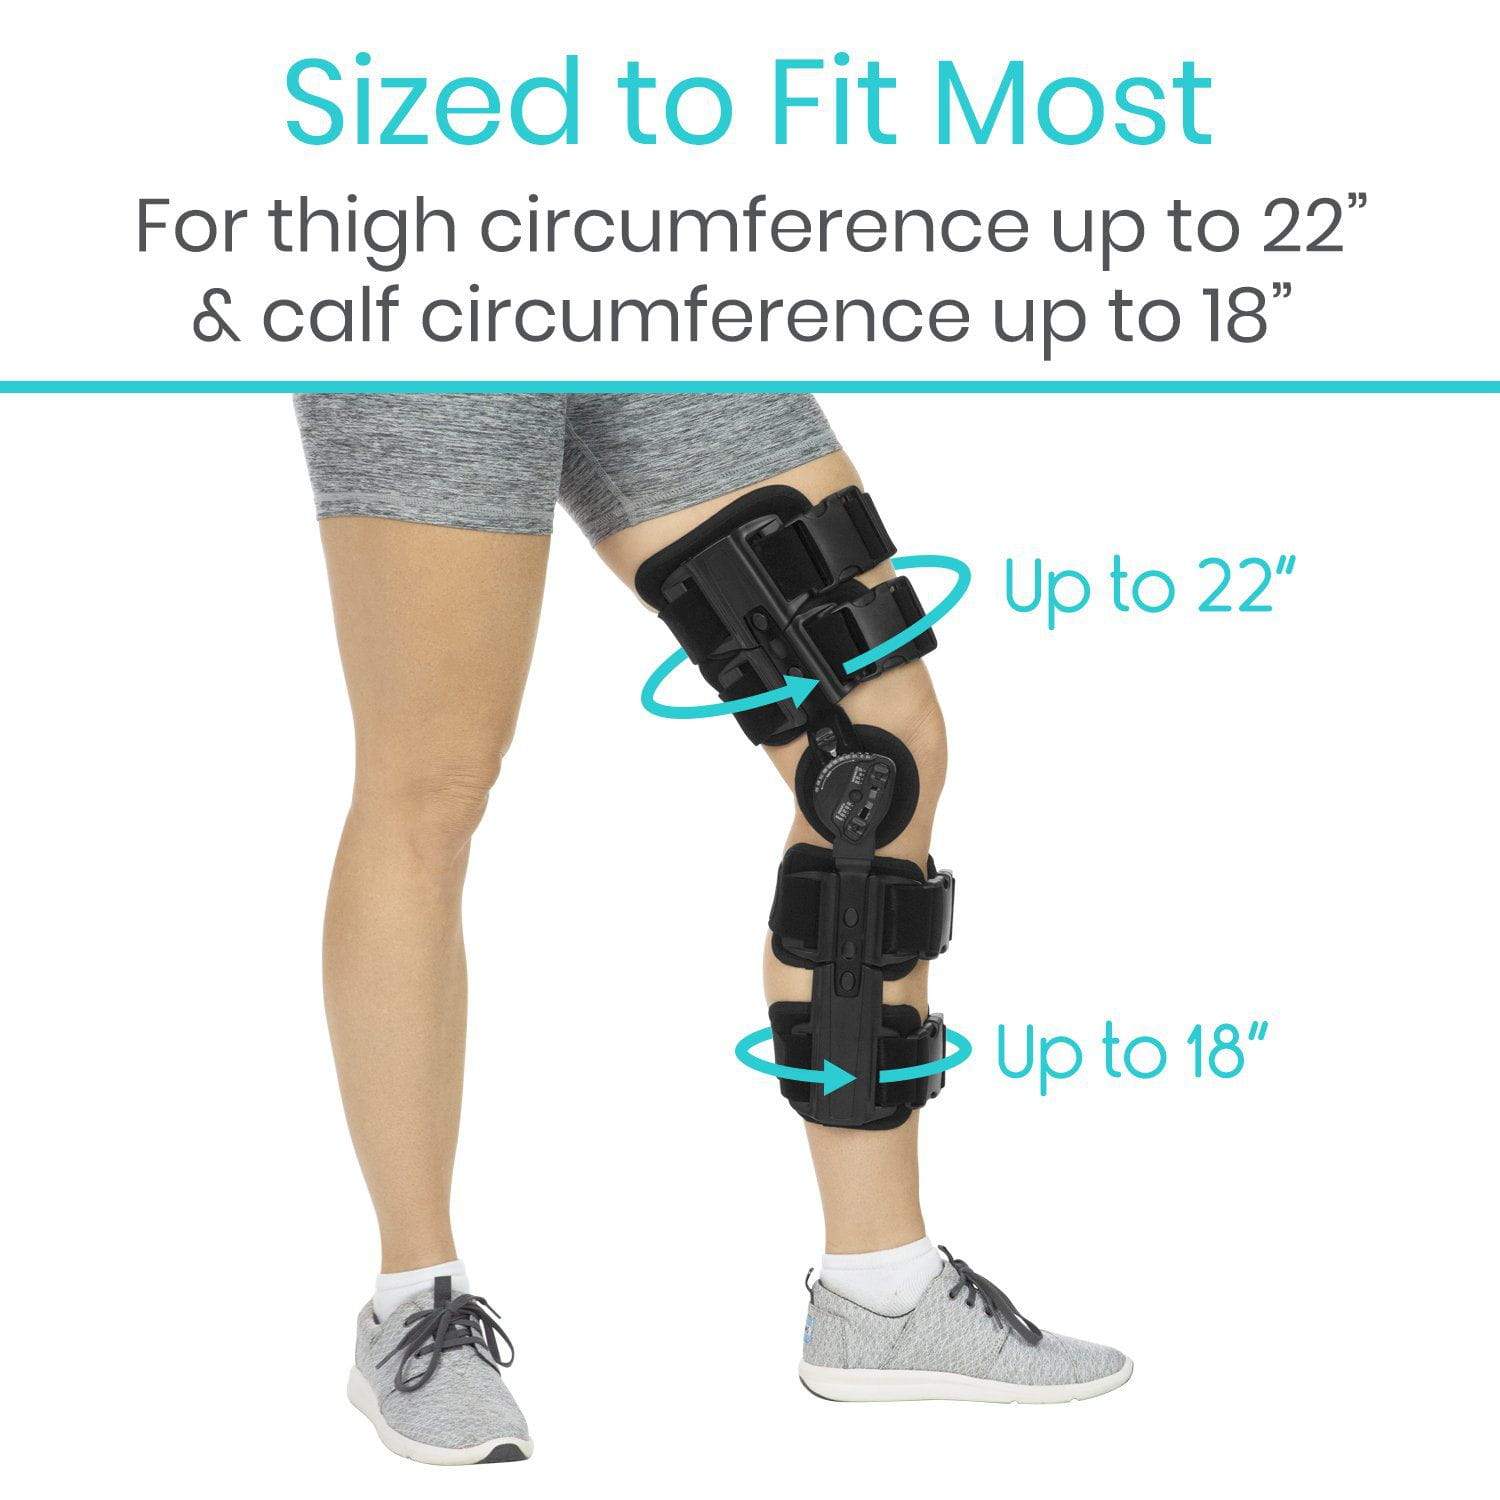 ROM Knee Brace – Americare Medical Supplies & Services, Inc.